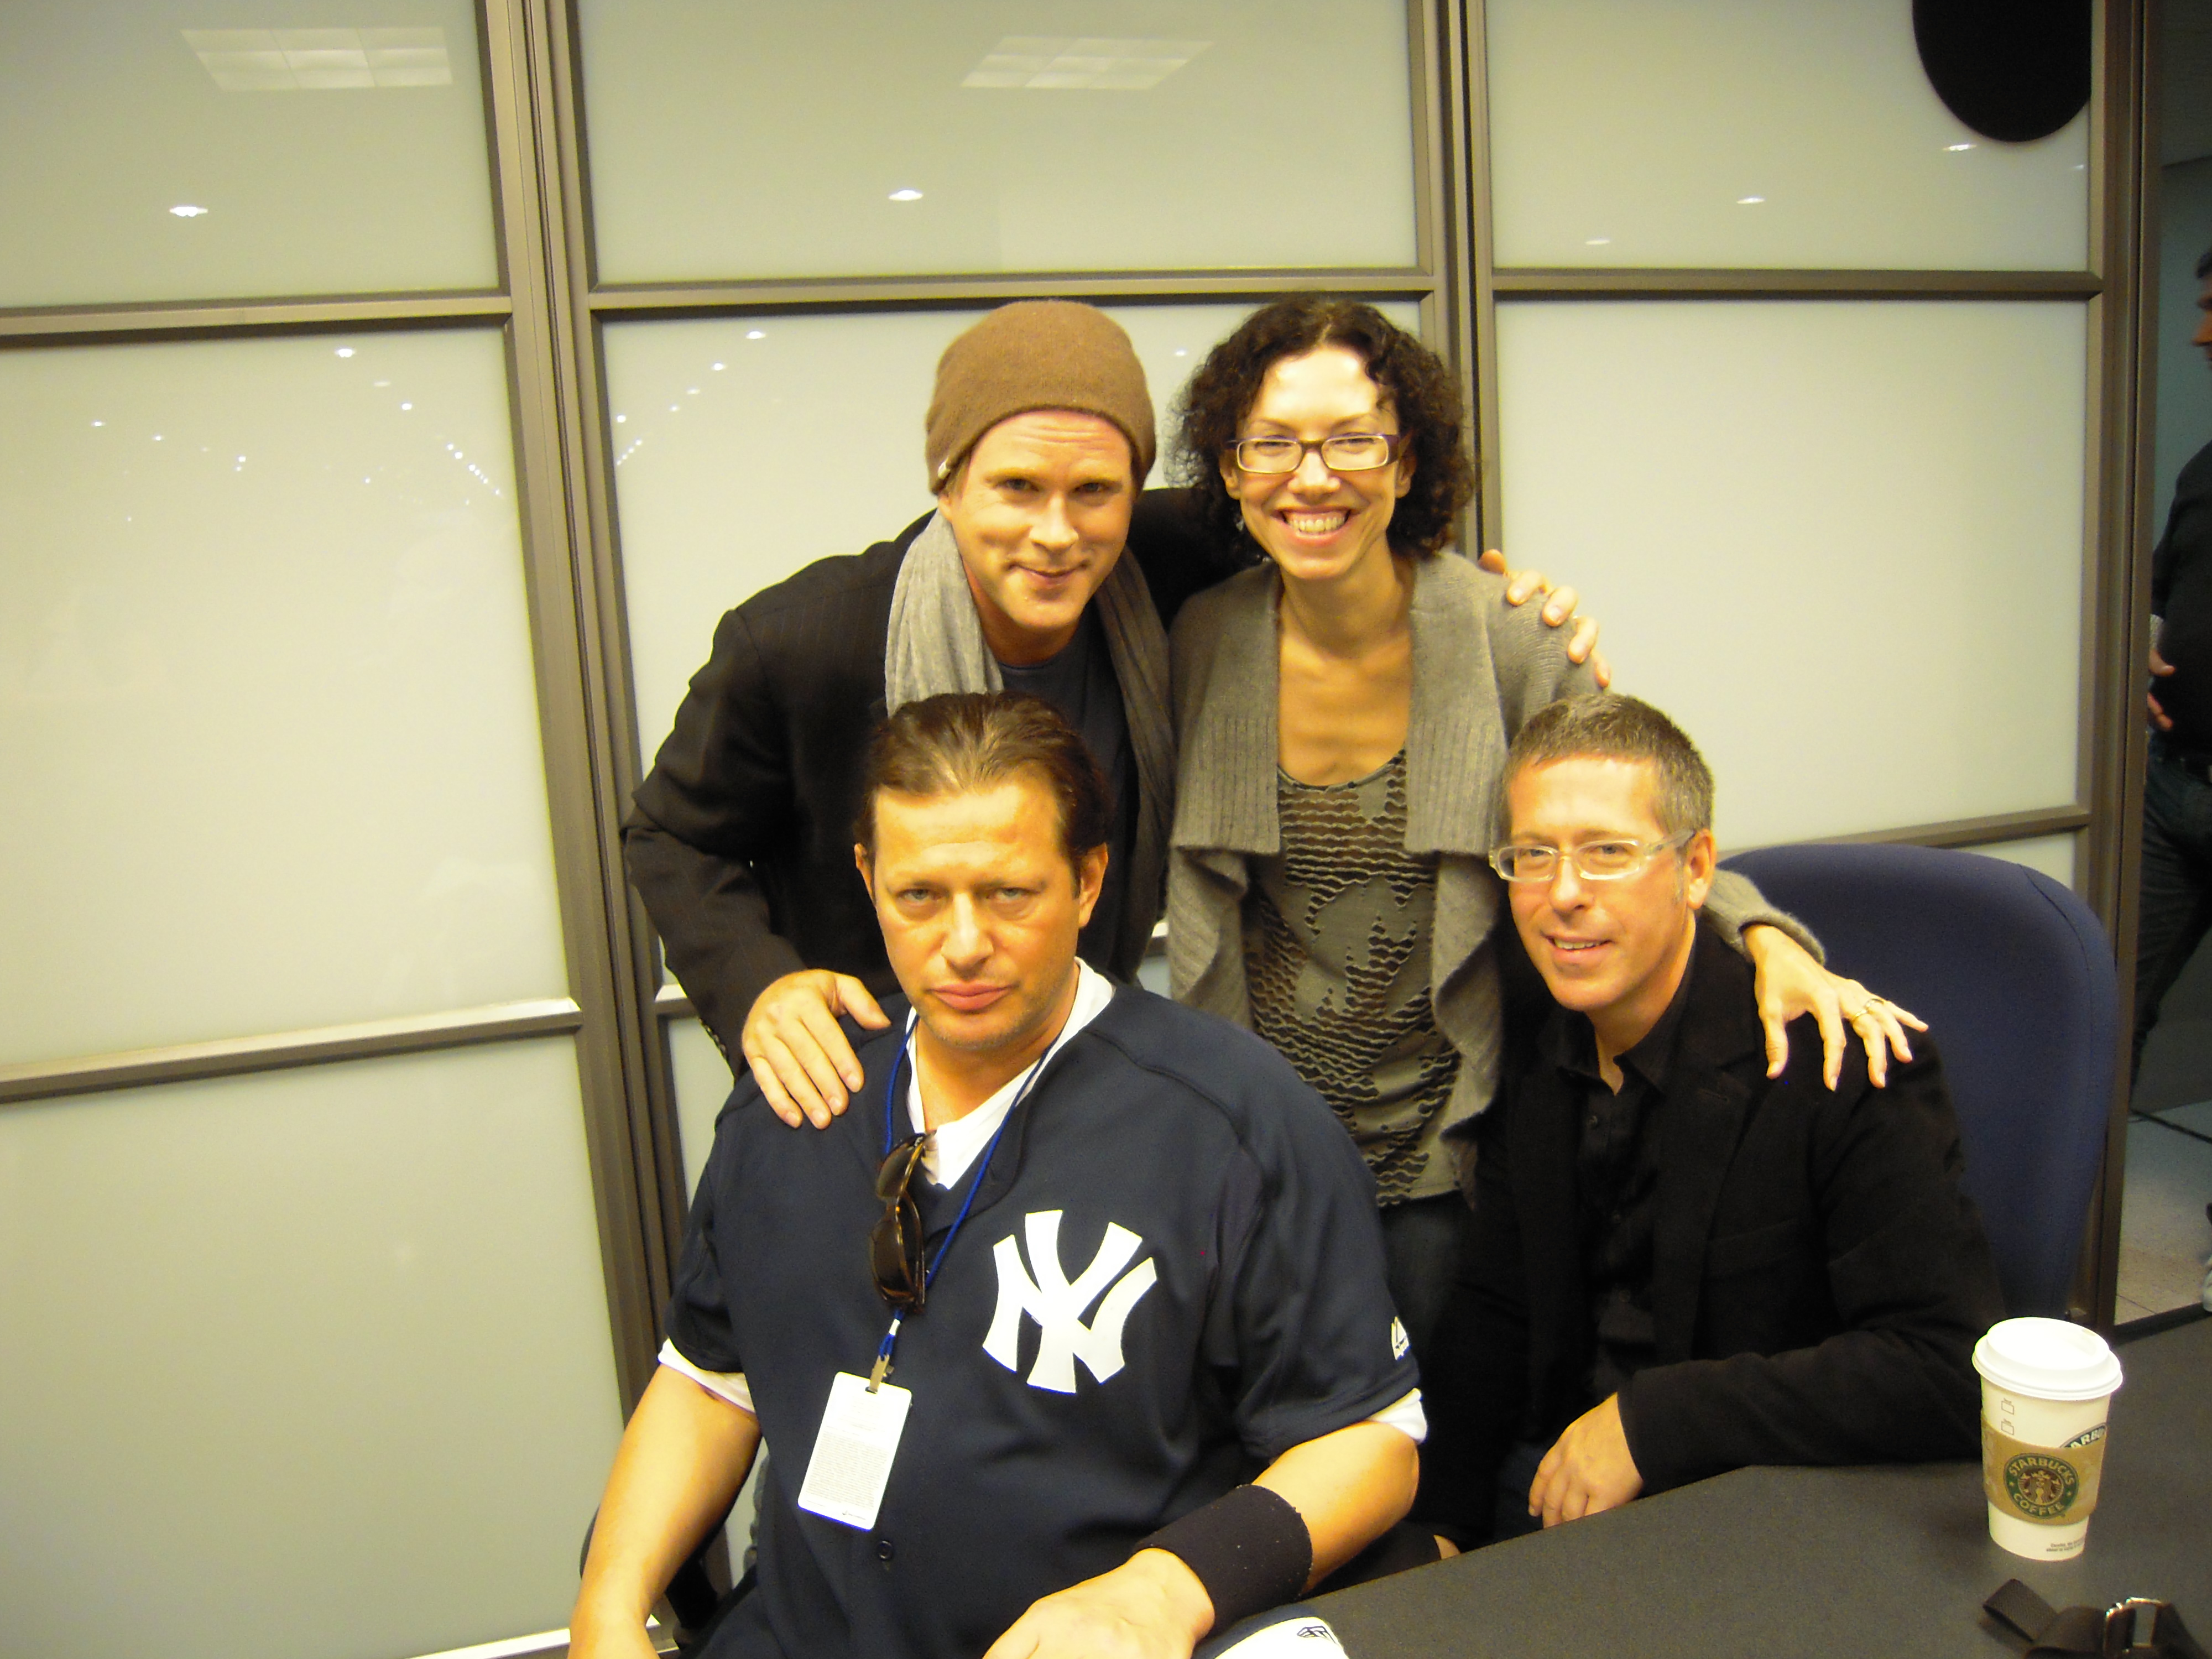 Cary Elwes, Elizabeth Rowin, Costas Mandylor and Kevin Greutert at the 2010 New York Comic-Con promoting SAW 3D.